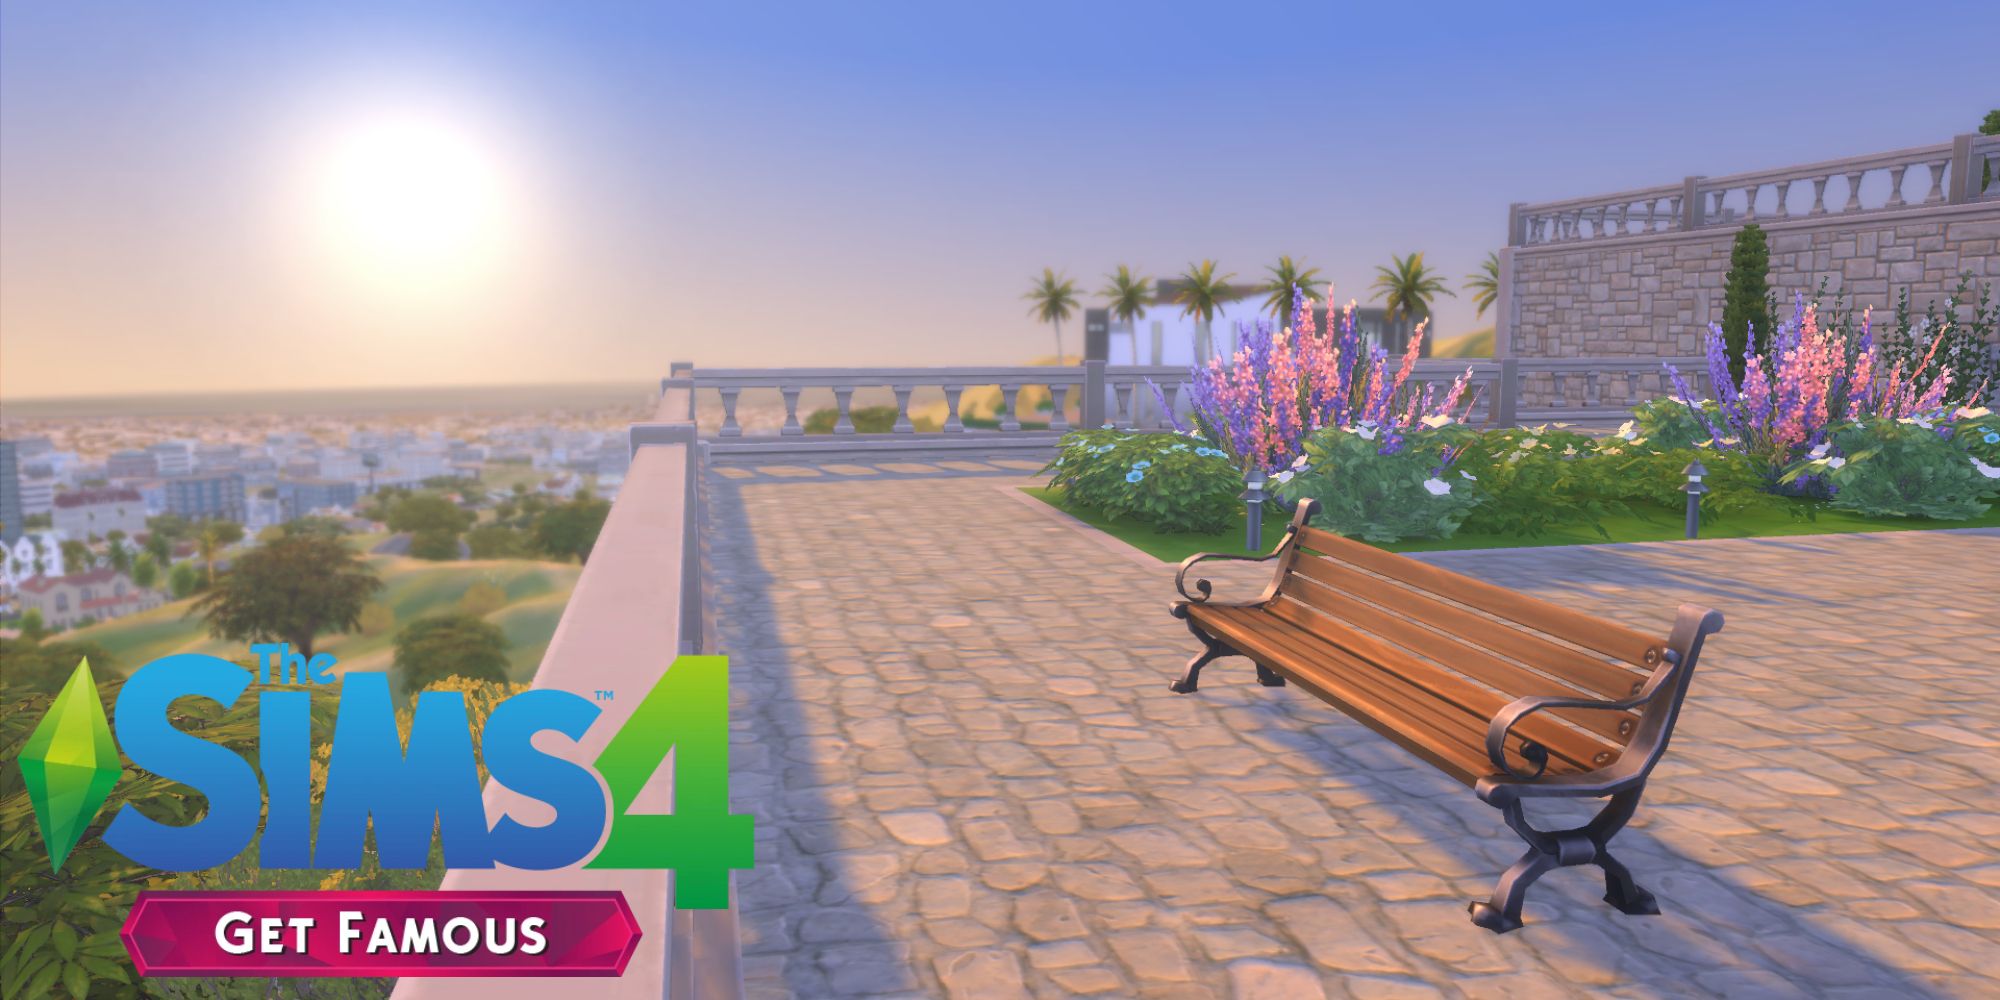 Del Sol Valley, the world from the Get Famous expansion, is one of the hottest worlds in The Sims 4